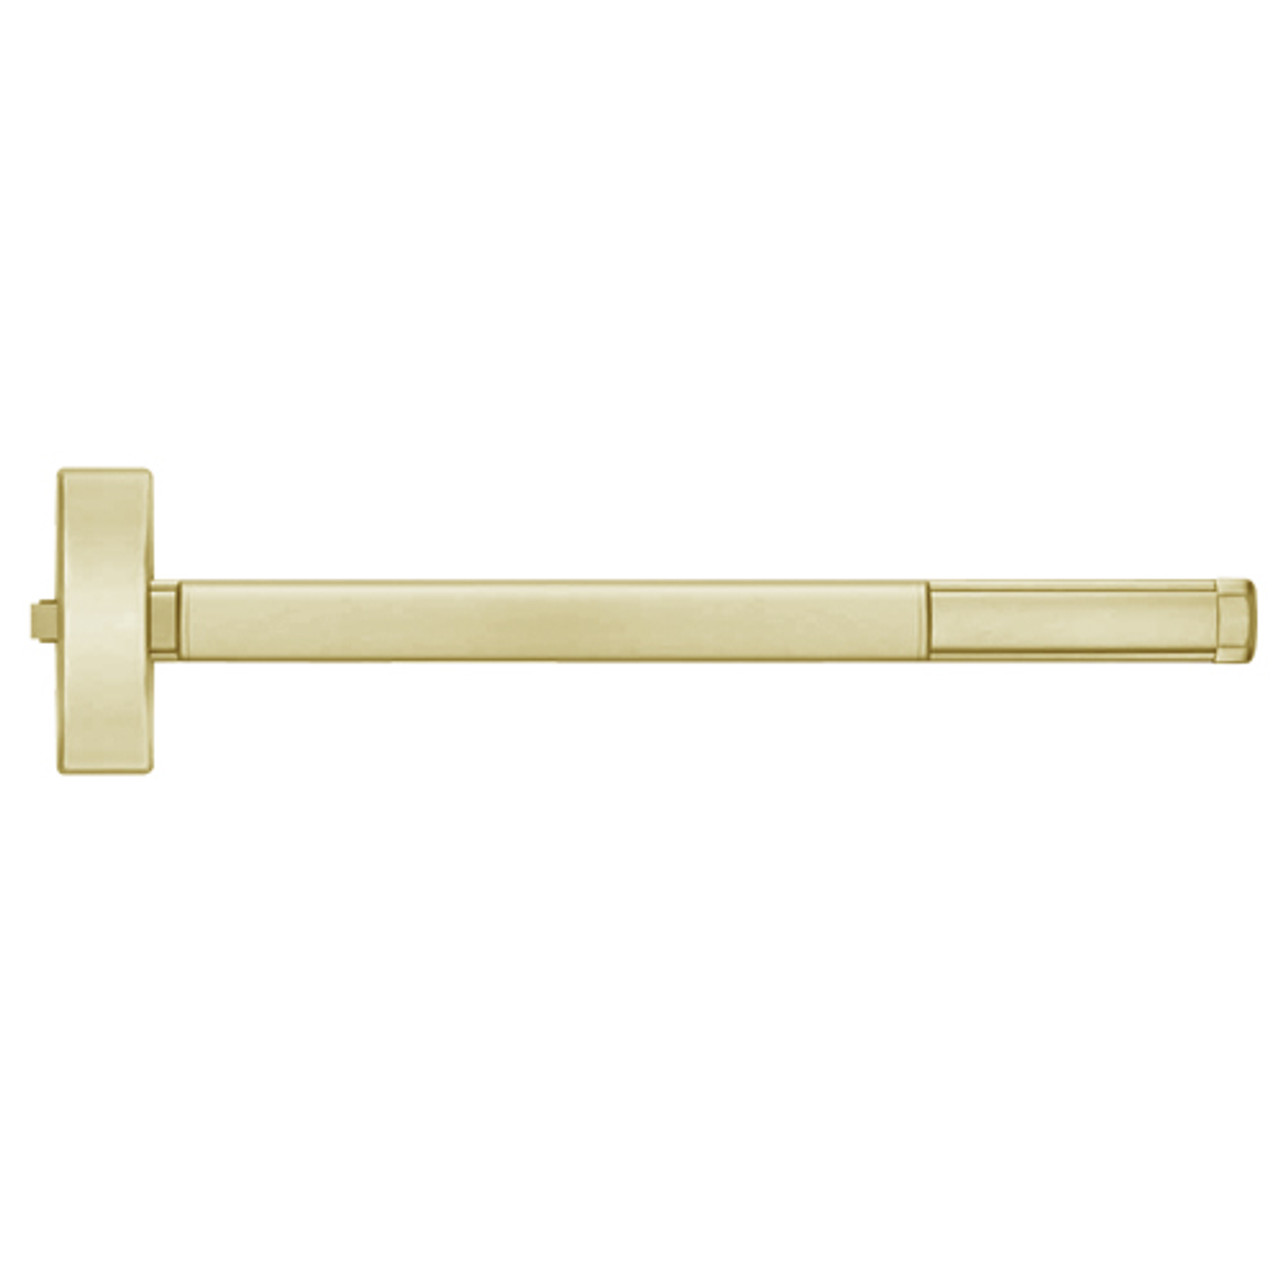 DE2115-606-36 PHI 2100 Series Non Fire Rated Apex Rim Exit Device with Delayed Egress Prepped for Thumb Piece Always Active in Satin Brass Finish